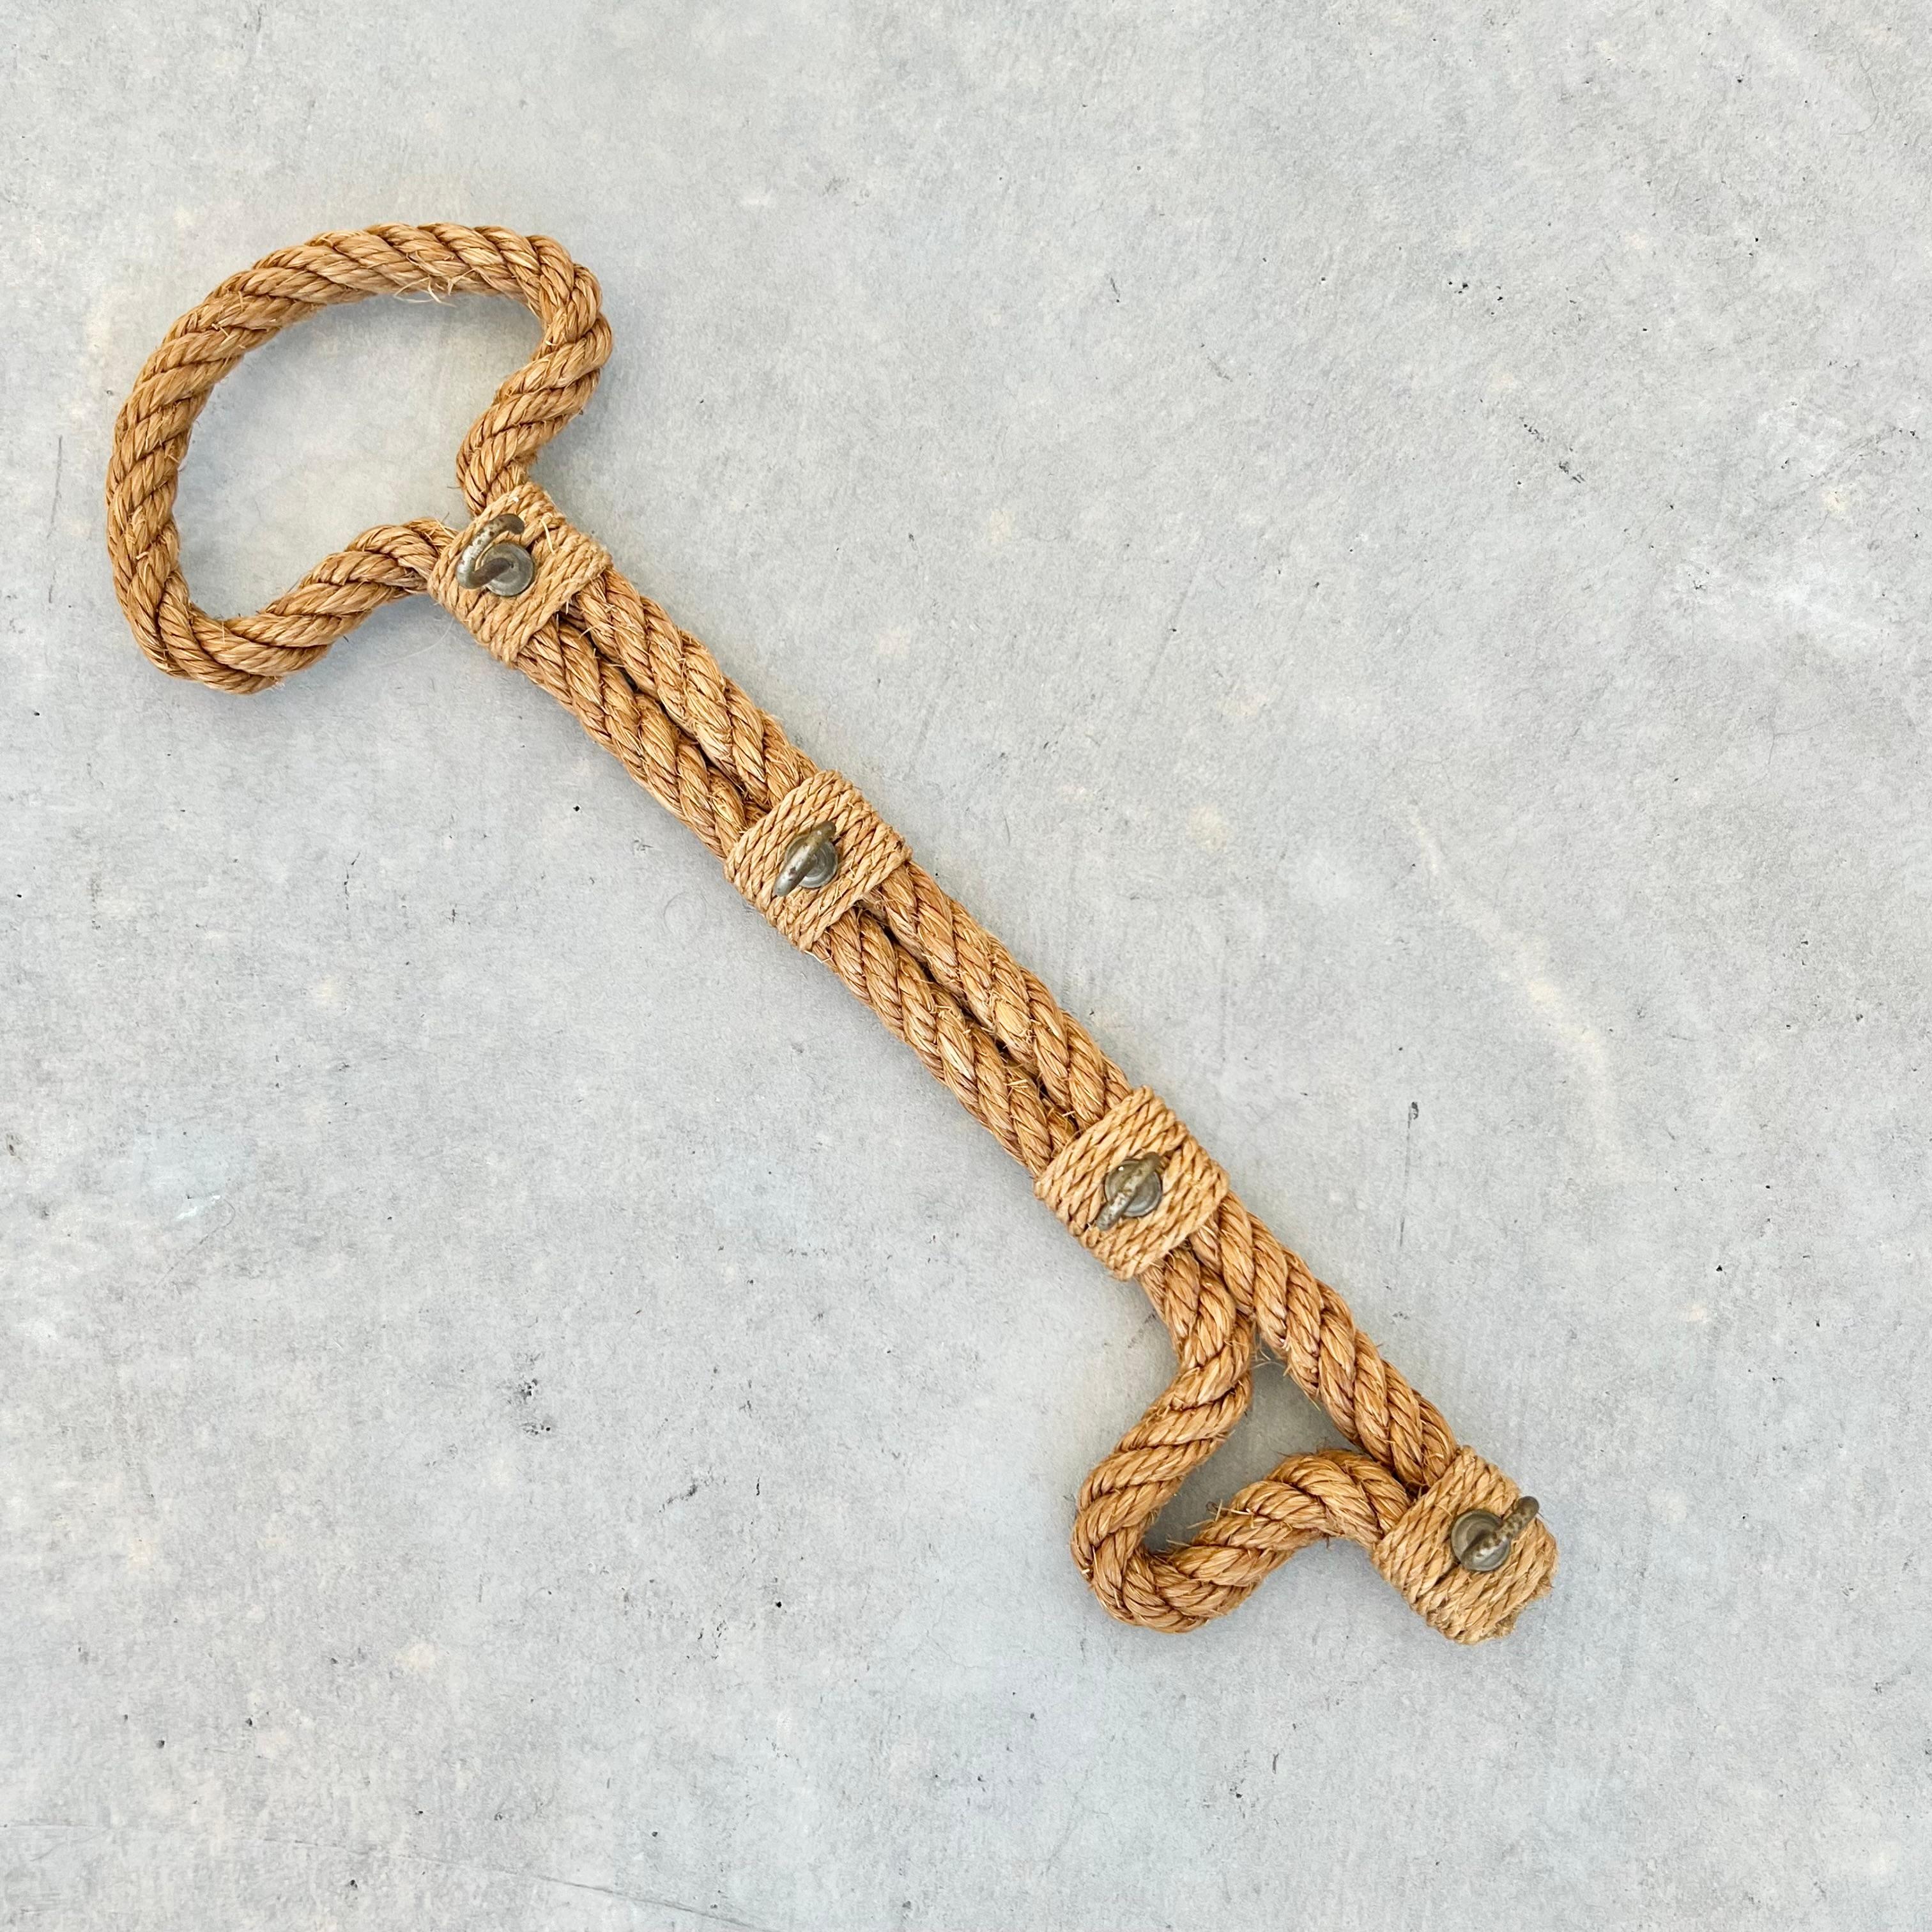 Mid-20th Century French Rope Key Wall Hook by Style of Audoux Minet, 1960s France For Sale